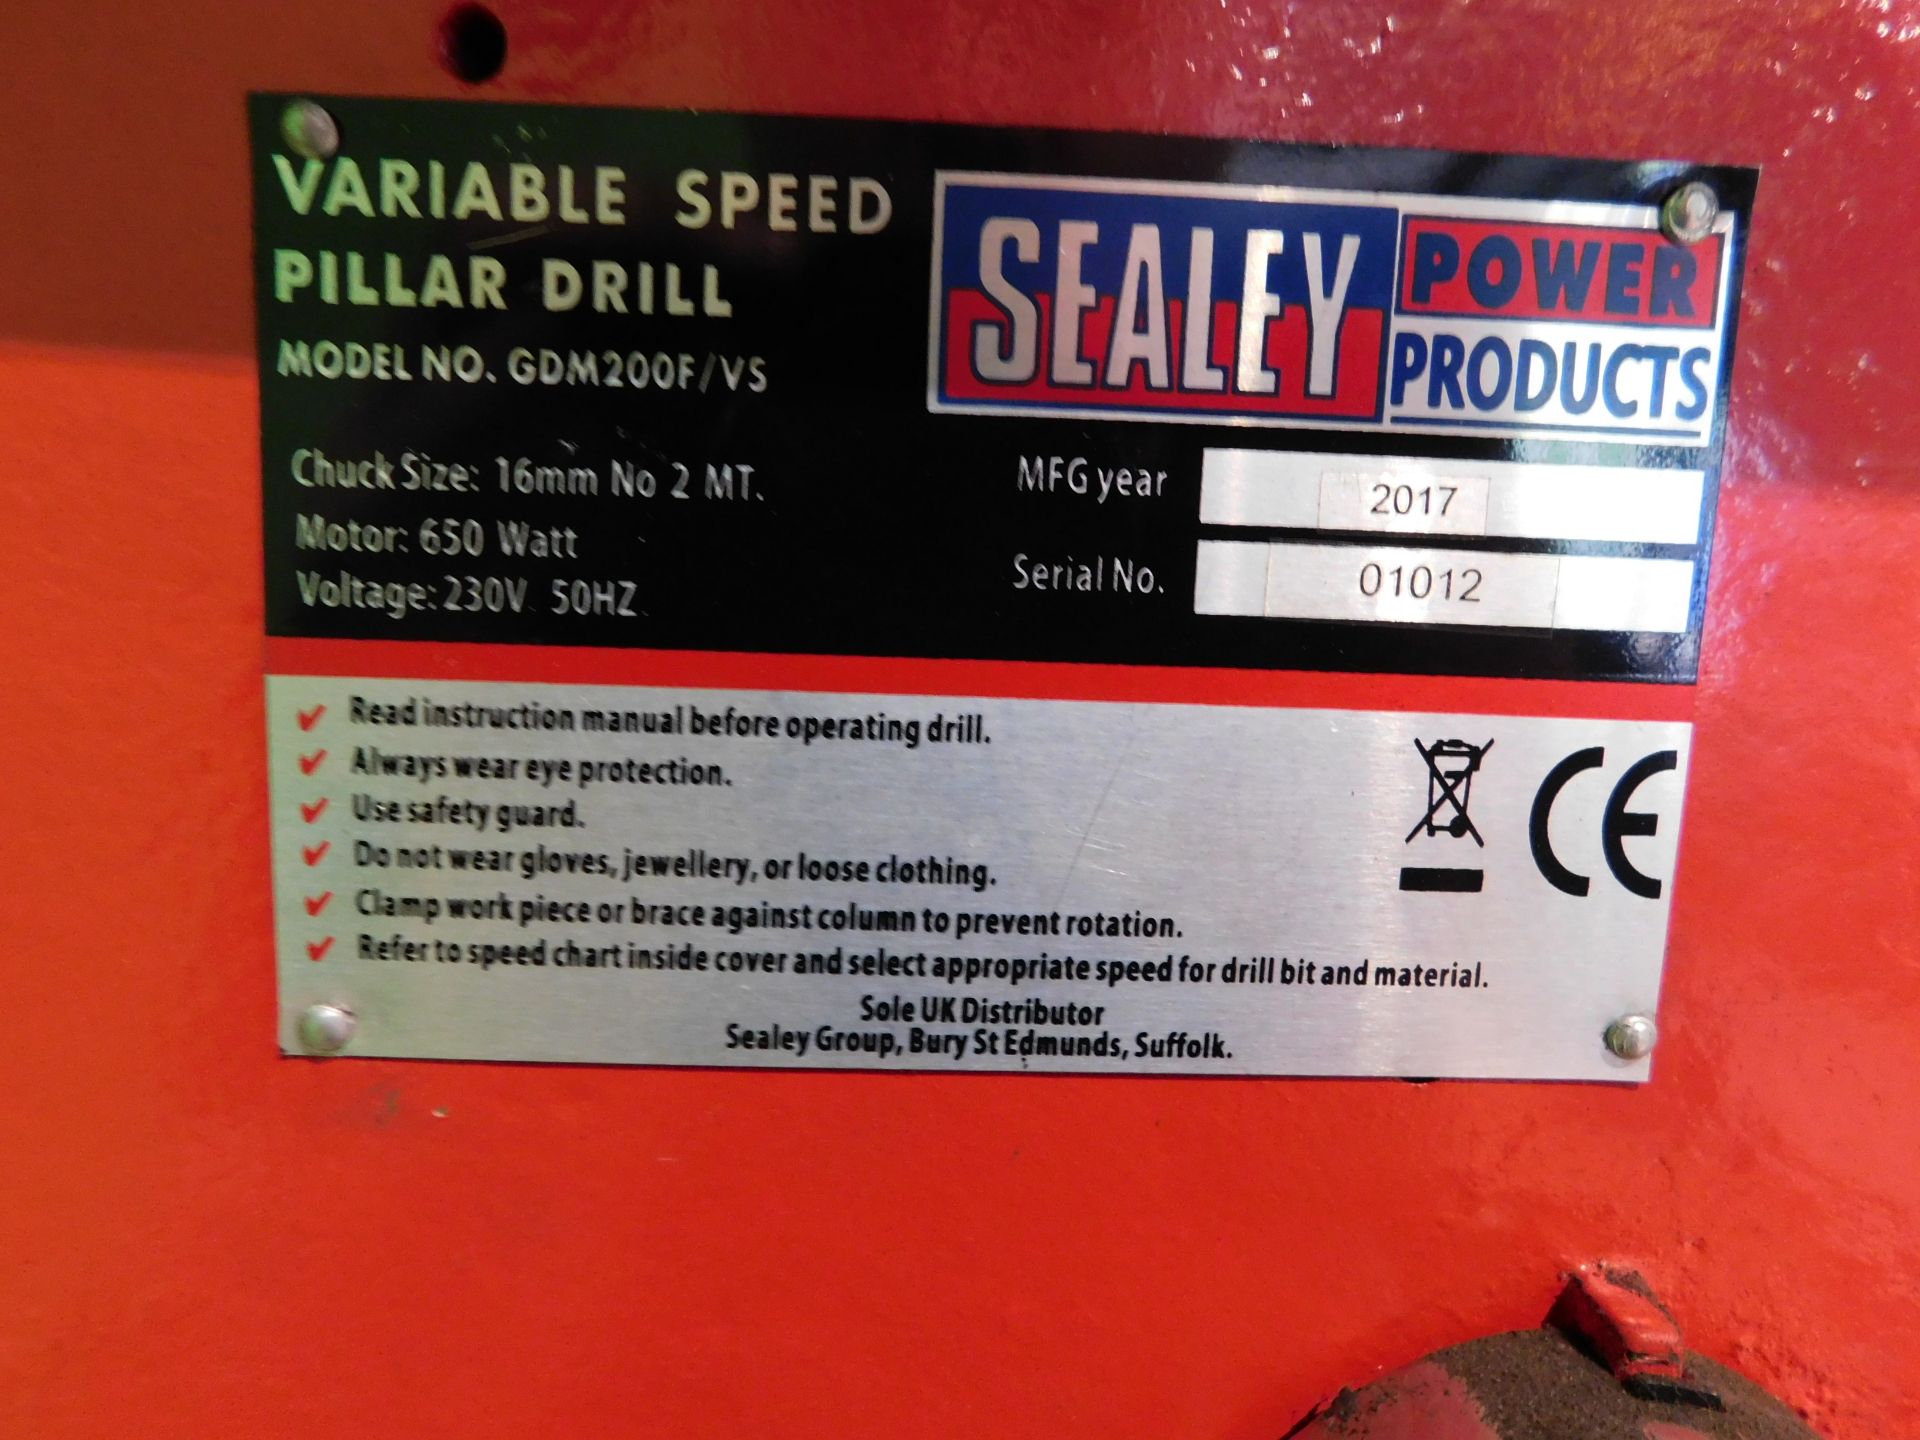 Sealey GDM200F/VS 16mm Variable Speed Pillar Drill, 240v (2017) Serial Number 01012 with Machine - Image 8 of 8